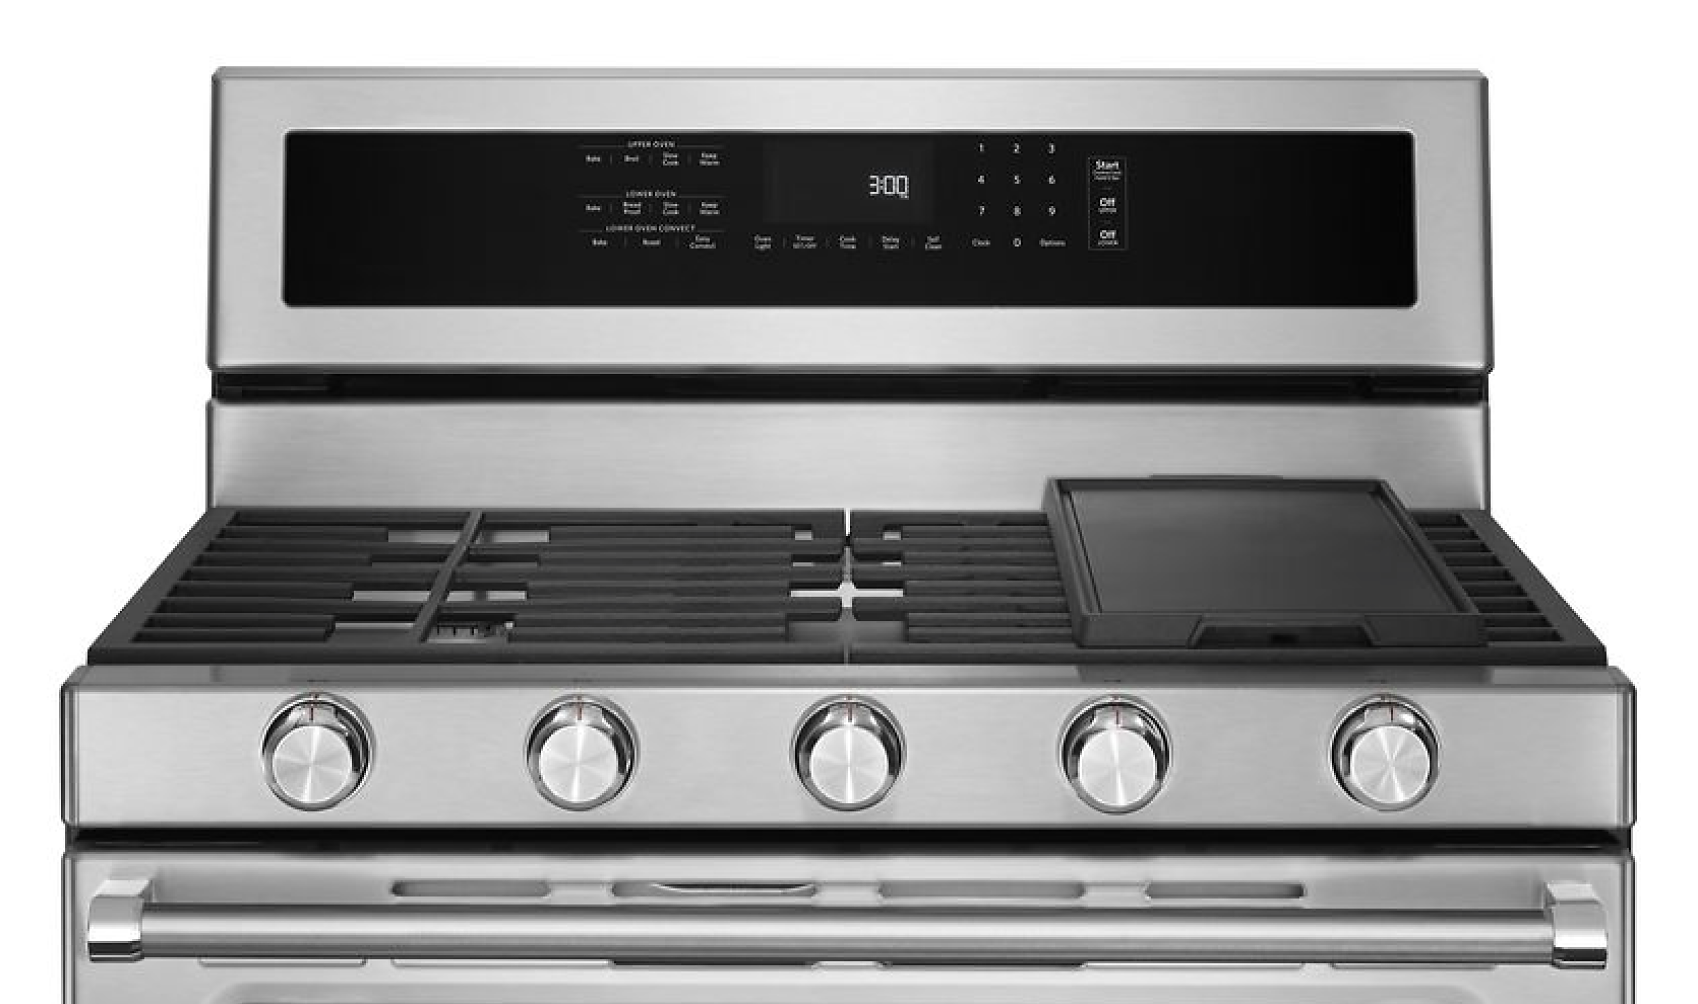 The top portion of a dual fuel range featuring a gas cooktop.